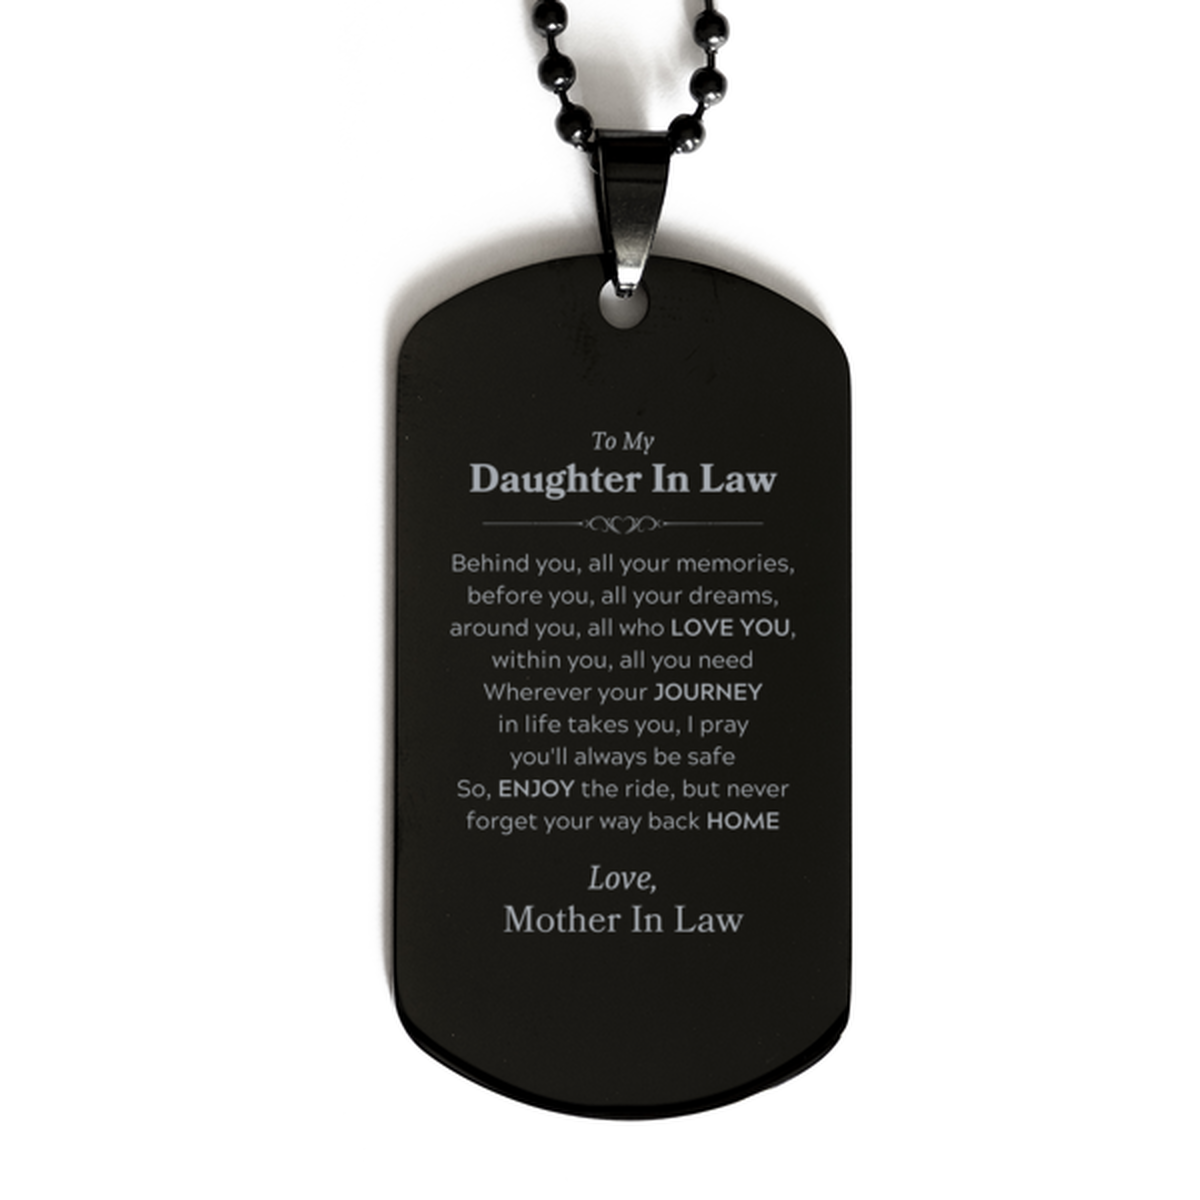 To My Daughter In Law Graduation Gifts from Mother In Law, Daughter In Law Black Dog Tag Christmas Birthday Gifts for Daughter In Law Behind you, all your memories, before you, all your dreams. Love, Mother In Law